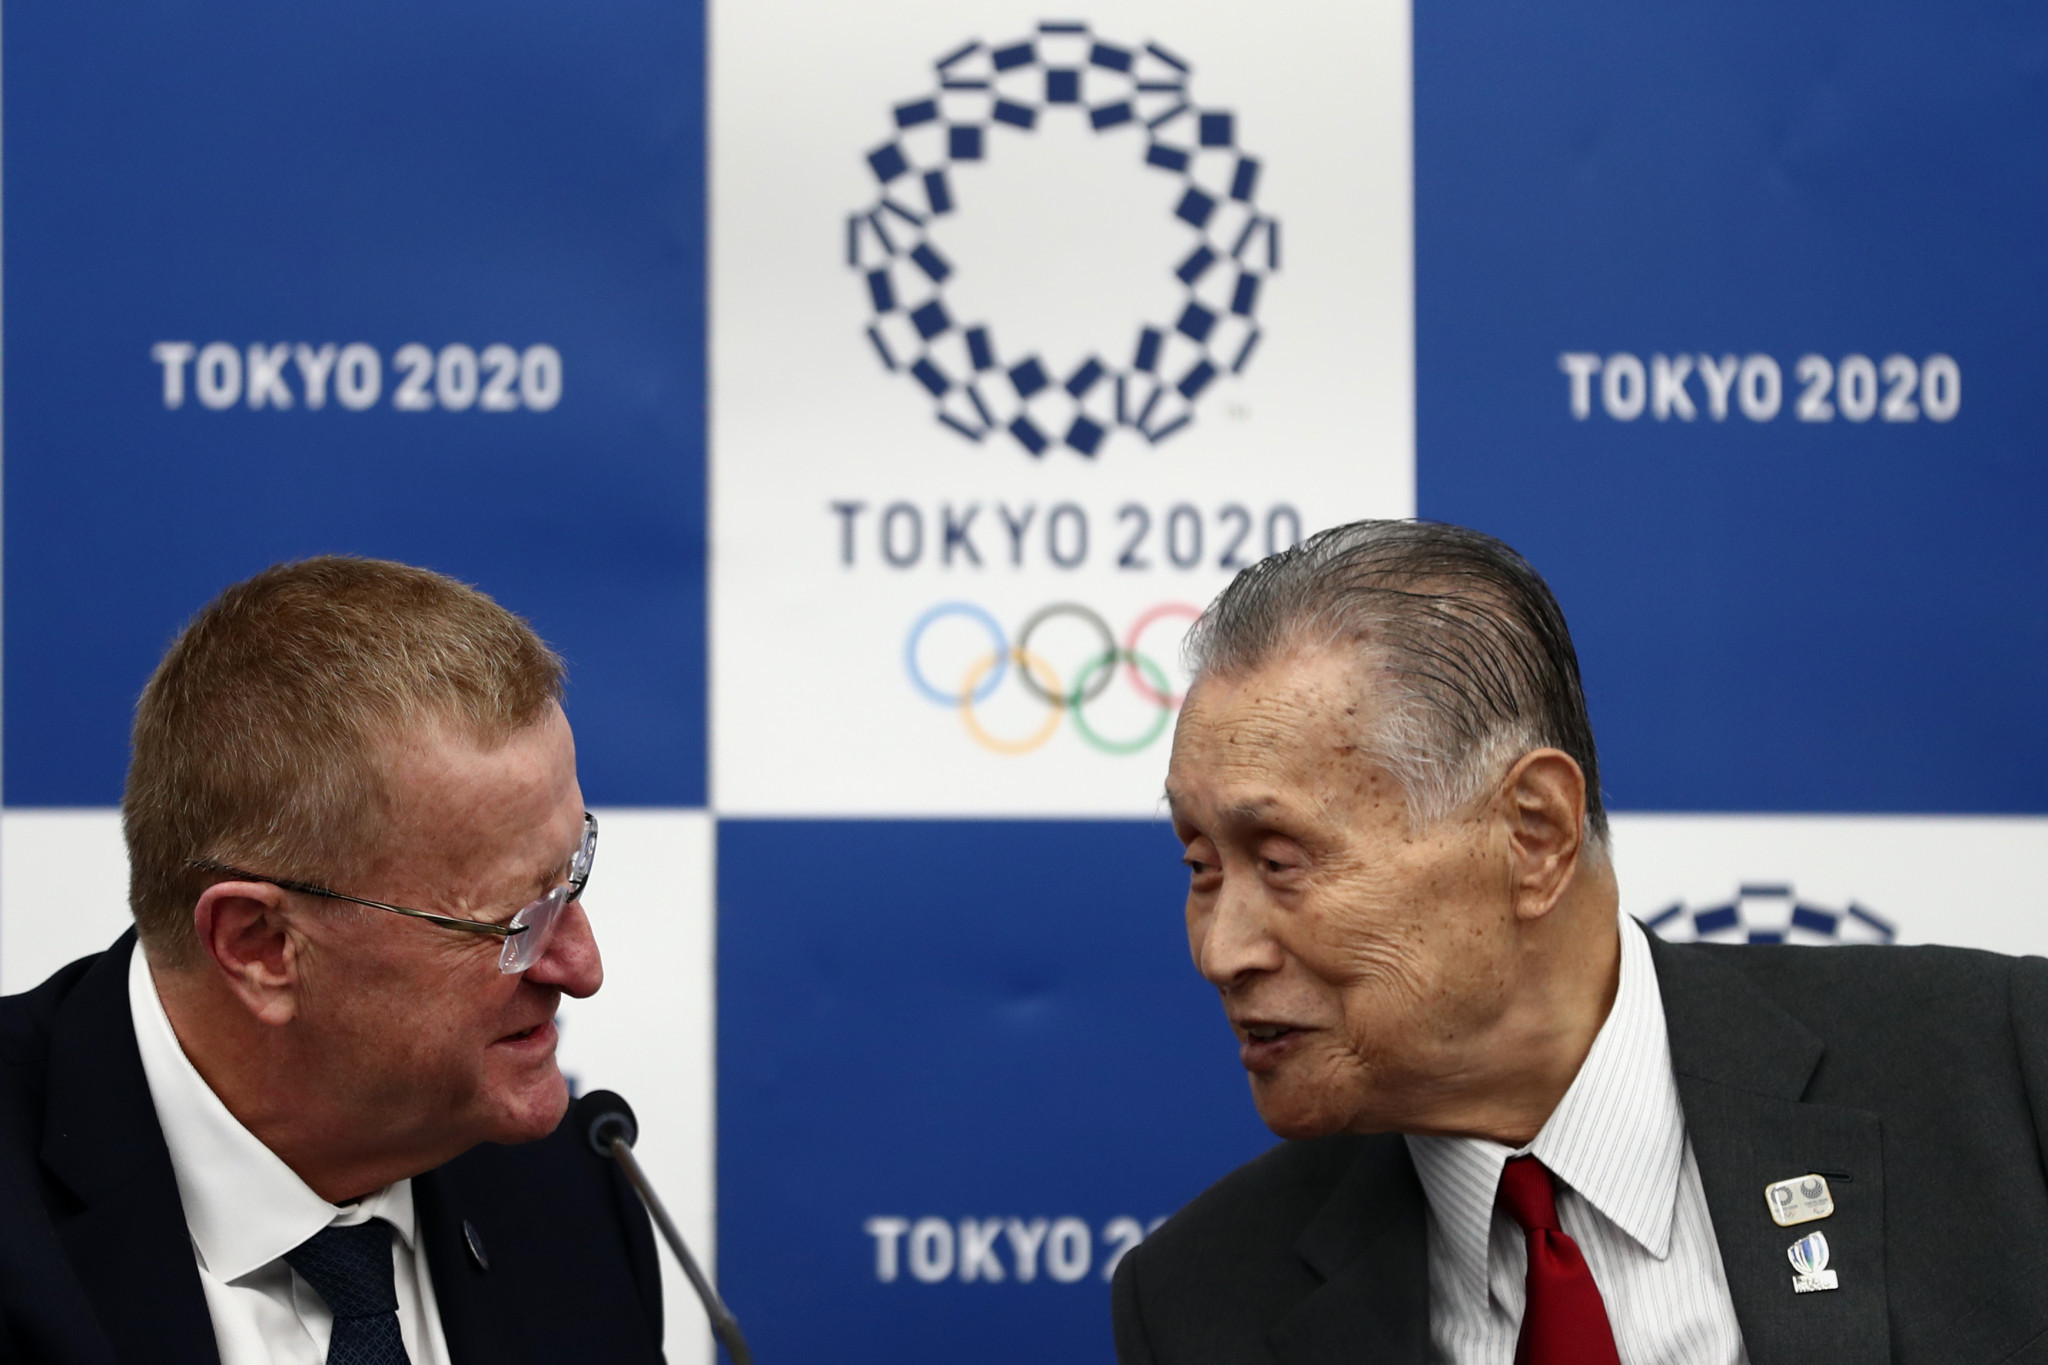 Transport and heat measures discussed as IOC Coordination Commission conclude visit with praise for Tokyo 2020 plans